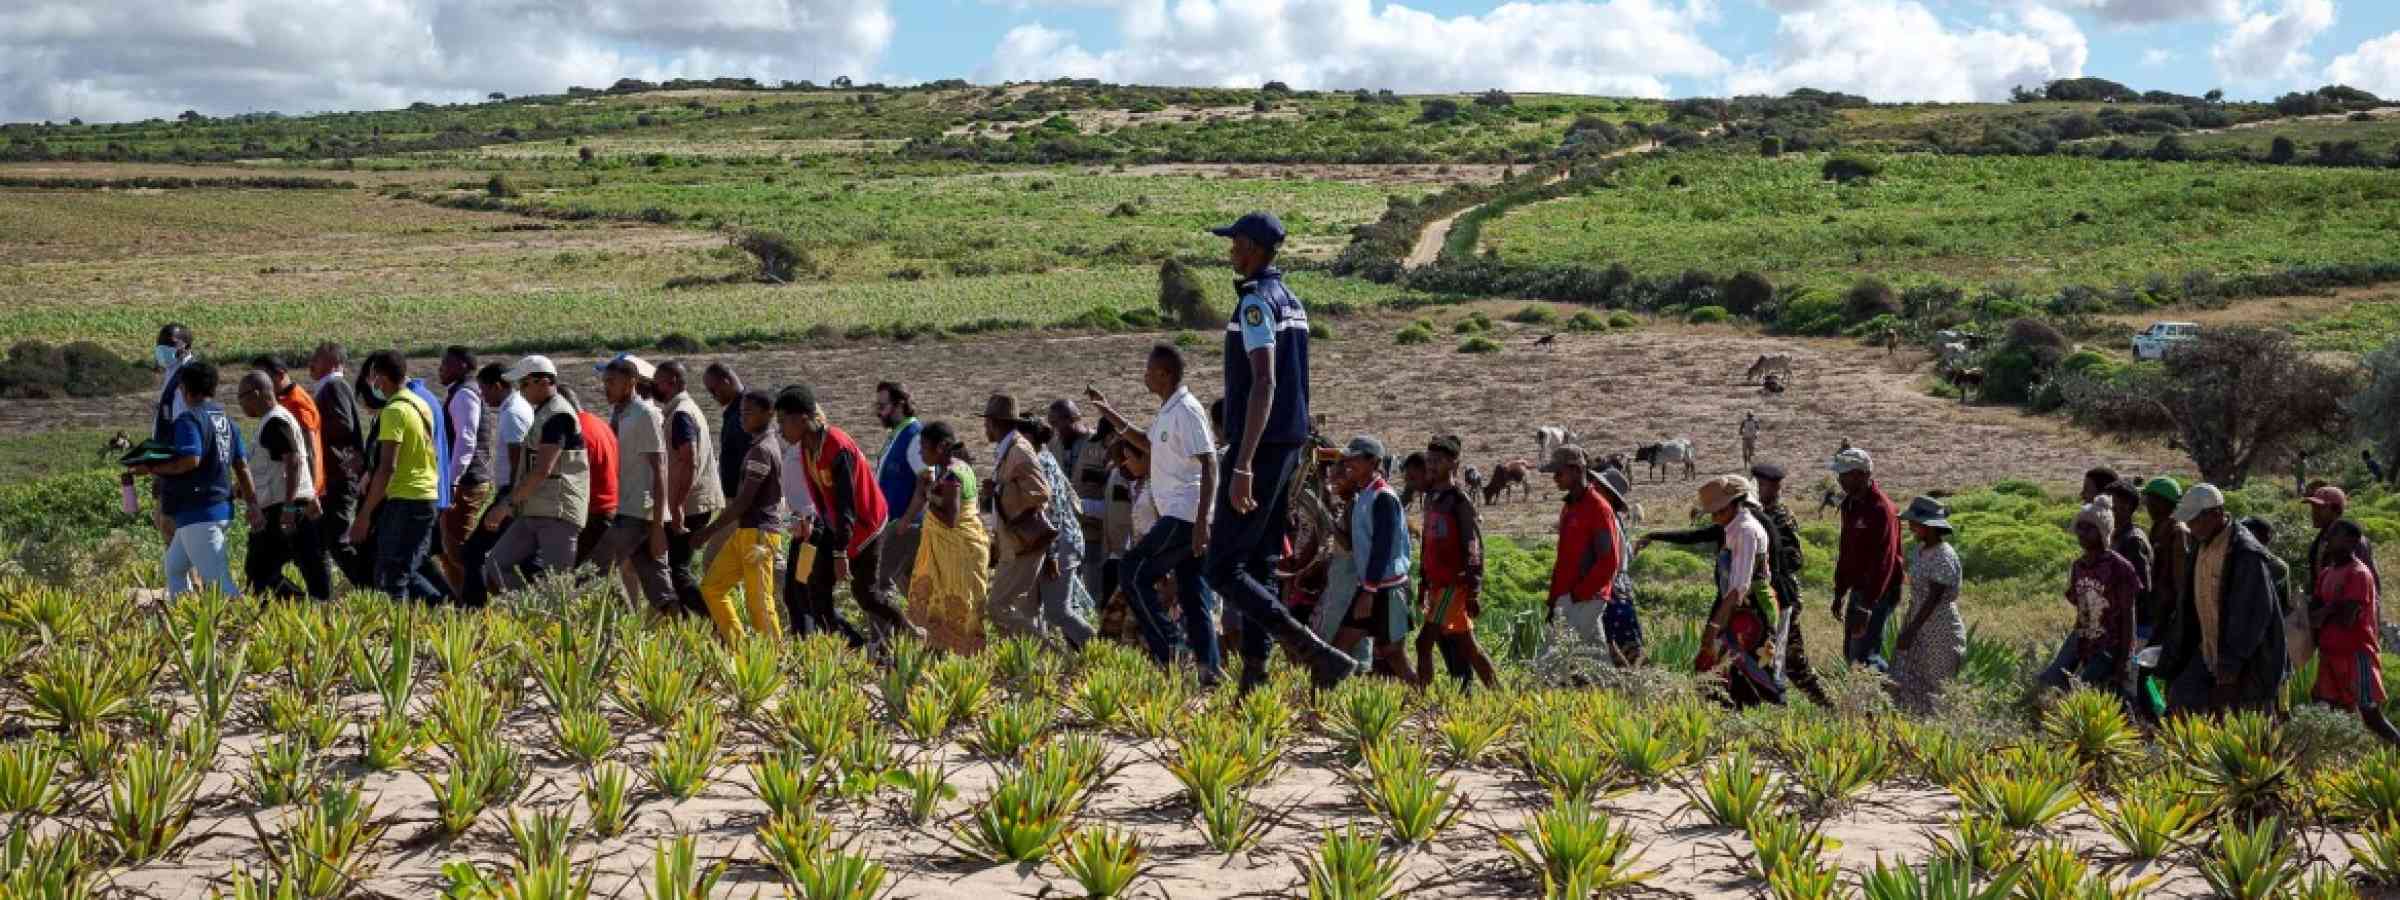 Group of people walking in a field in Madagascar